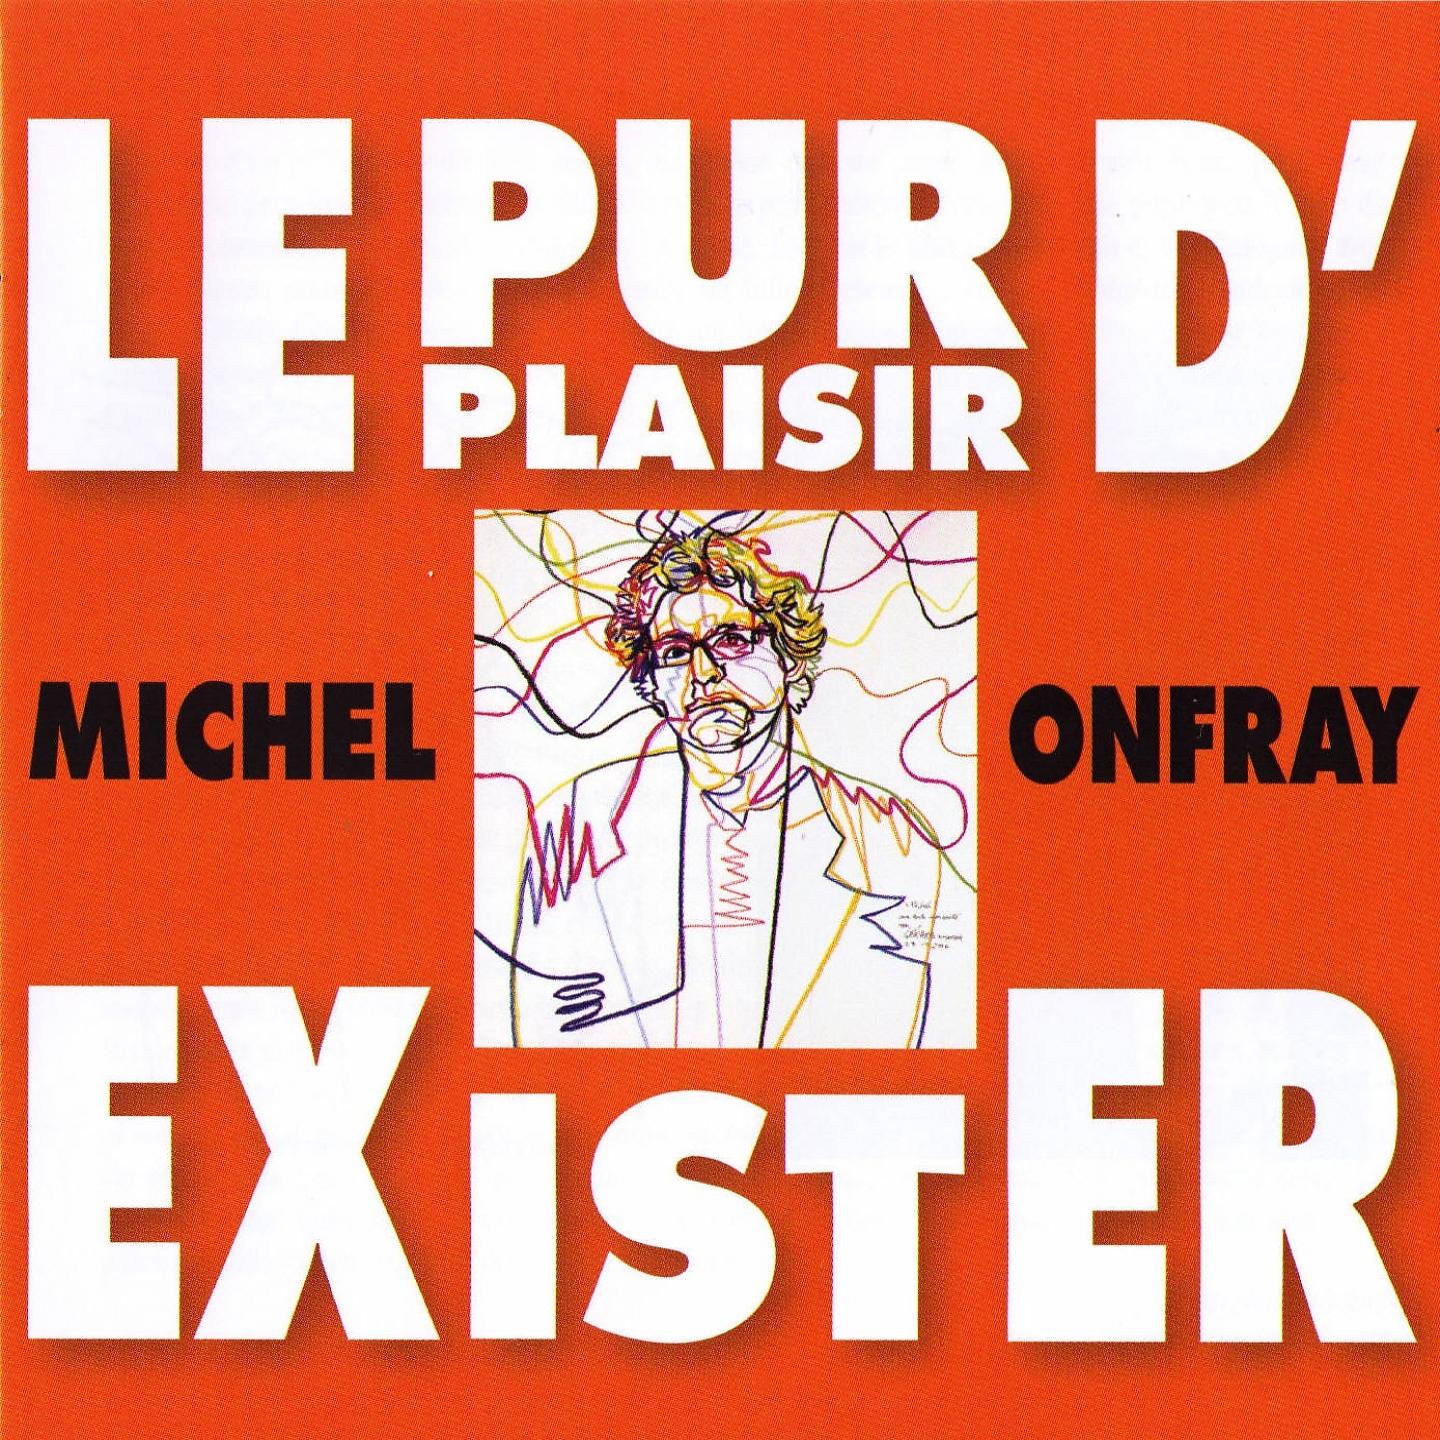 Постер альбома Michel Onfray : Le pur plaisir d'Exister